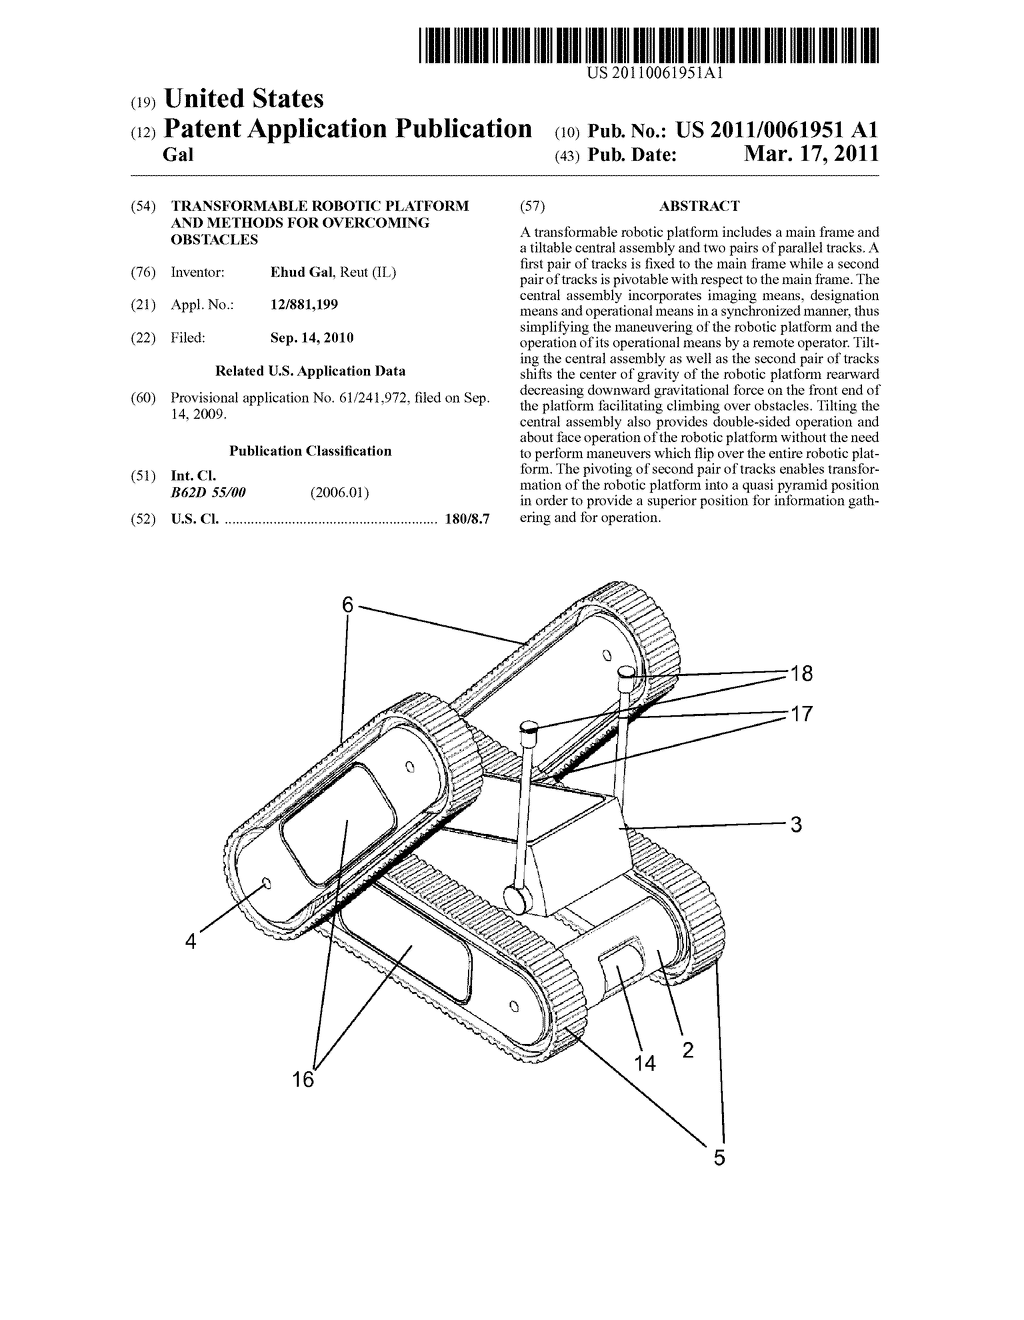 Transformable Robotic Platform and Methods for Overcoming Obstacles - diagram, schematic, and image 01